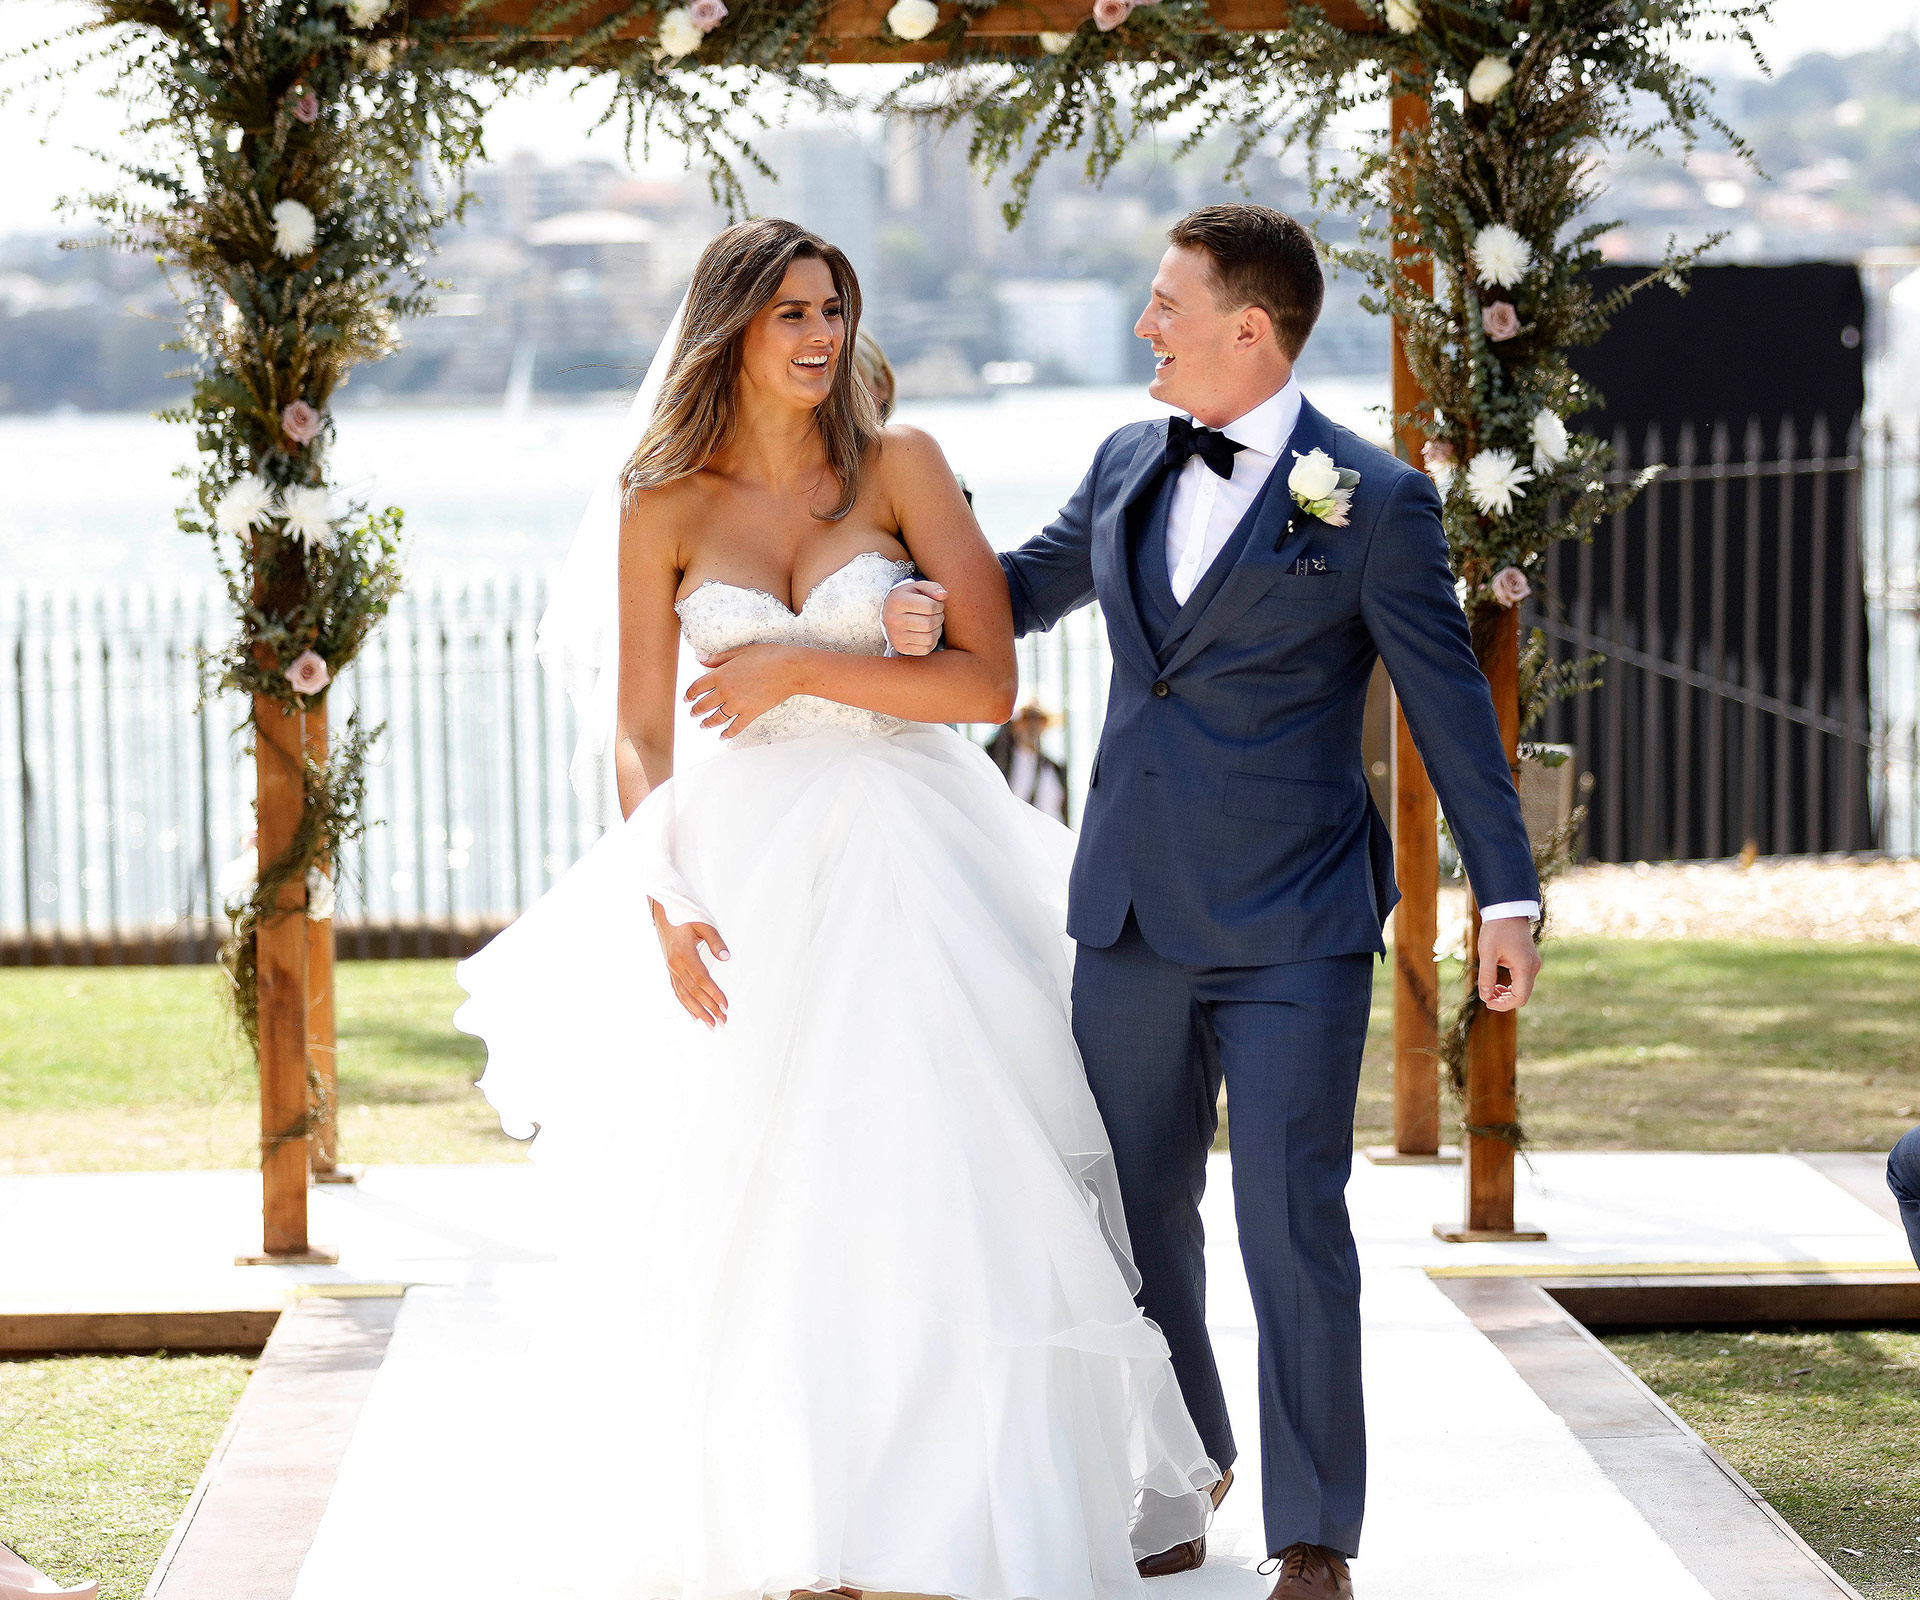 Cheryl Maitland and Jonathan Troughton Married At First Sight